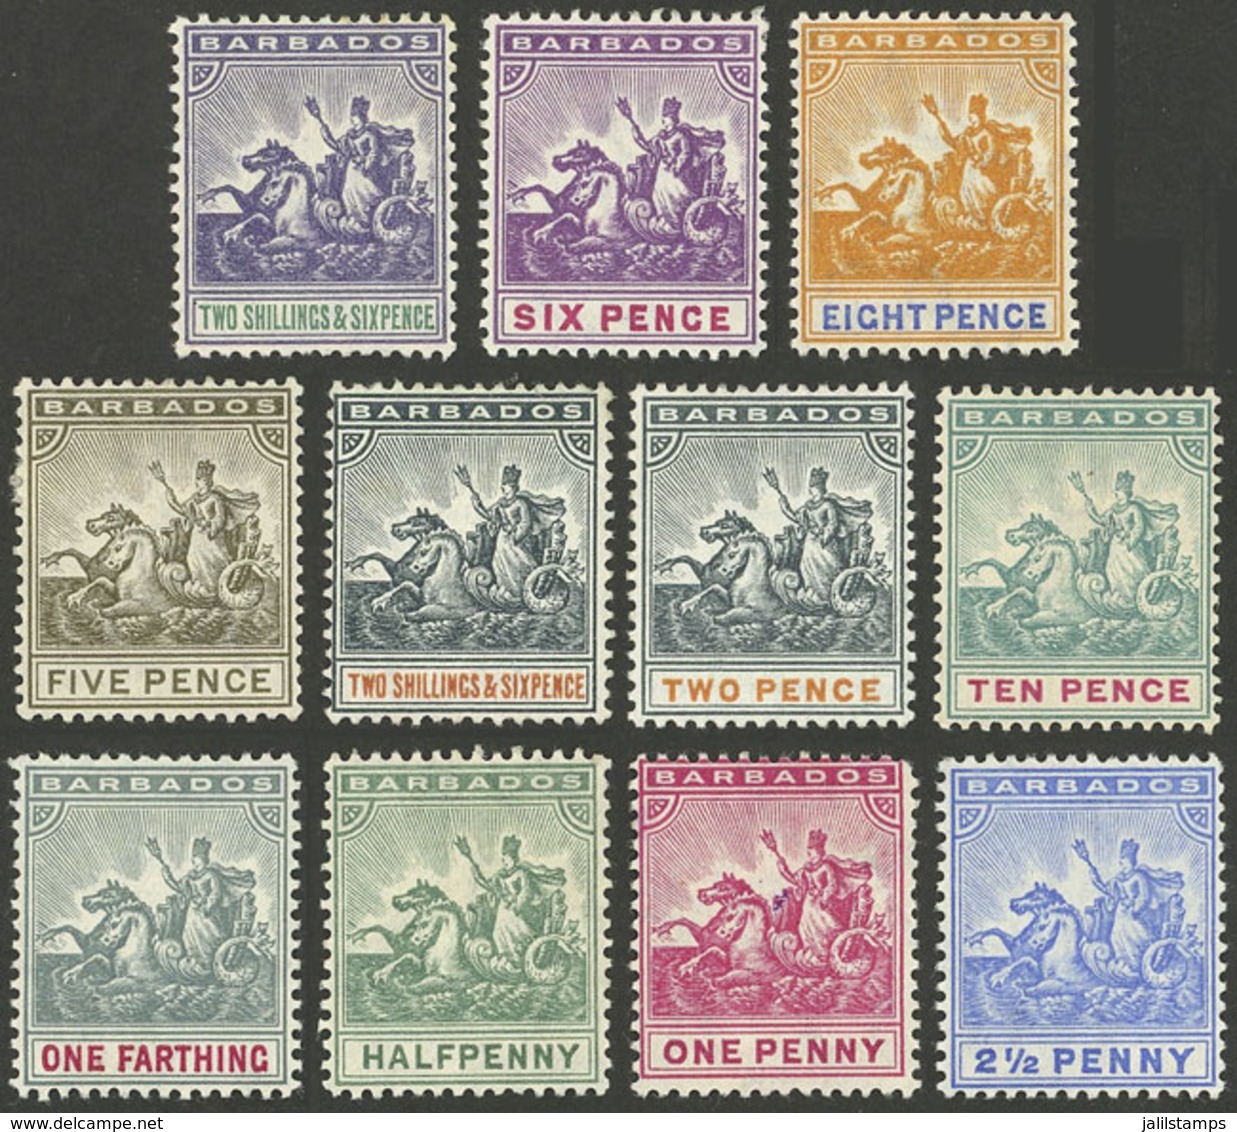 BARBADOS: Sc.76 + Other Values, 11 Values Issued Between 1892 And 1910, Mint Lightly Hinged, VF Quality, Catalog V - Barbades (...-1966)